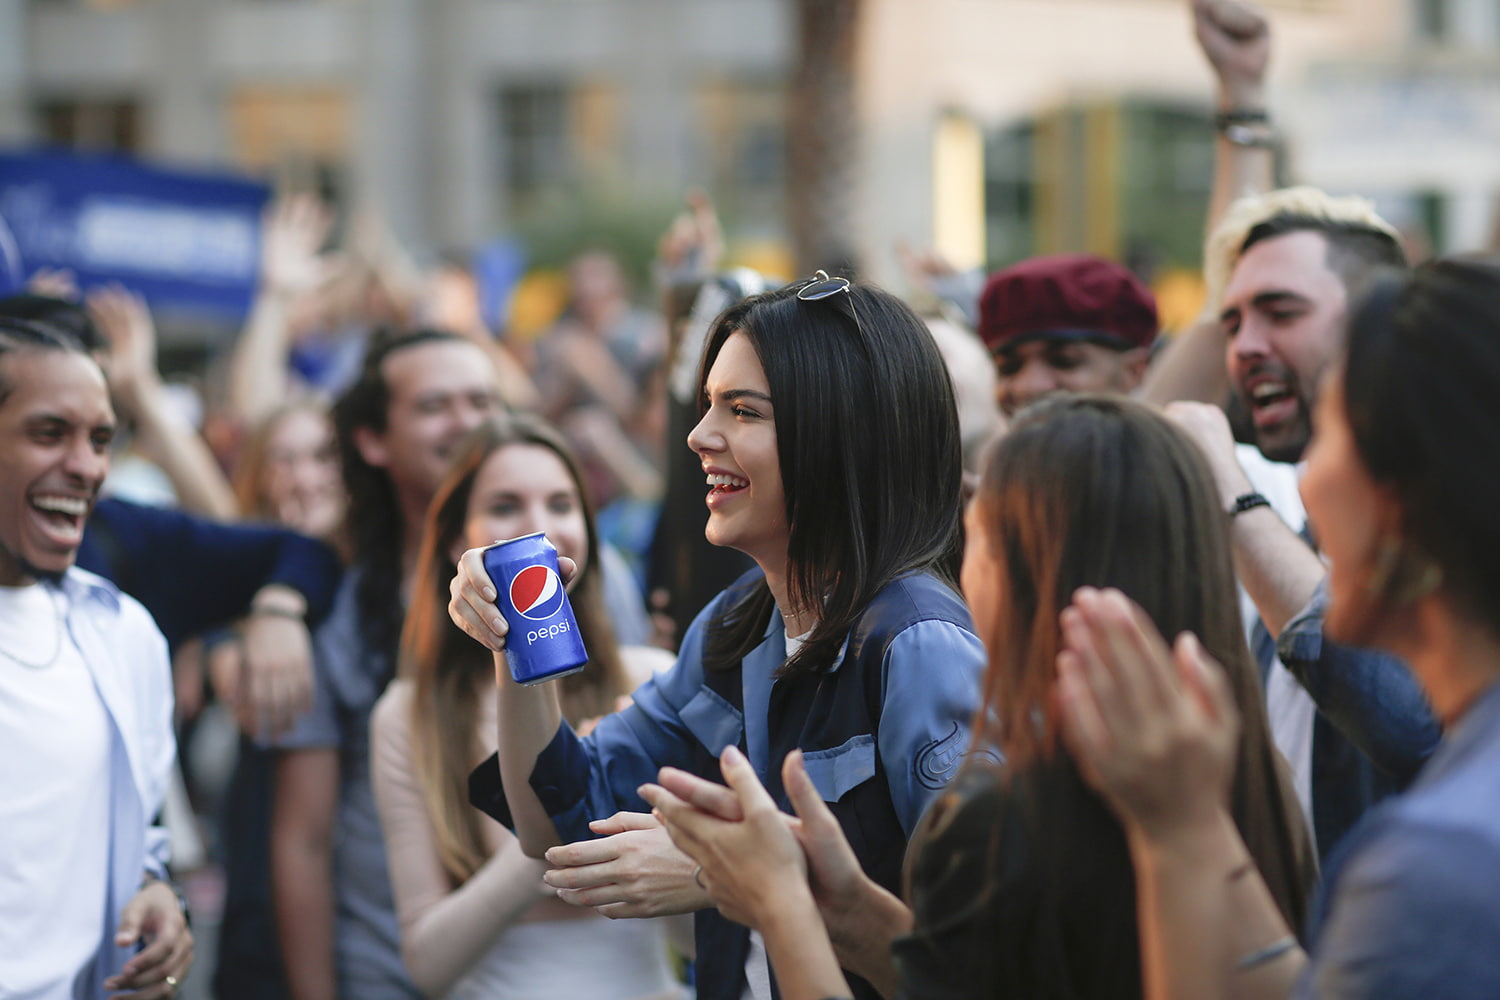 Kendall Jenner Pepsi ad - Social-Political Connections in Advertising